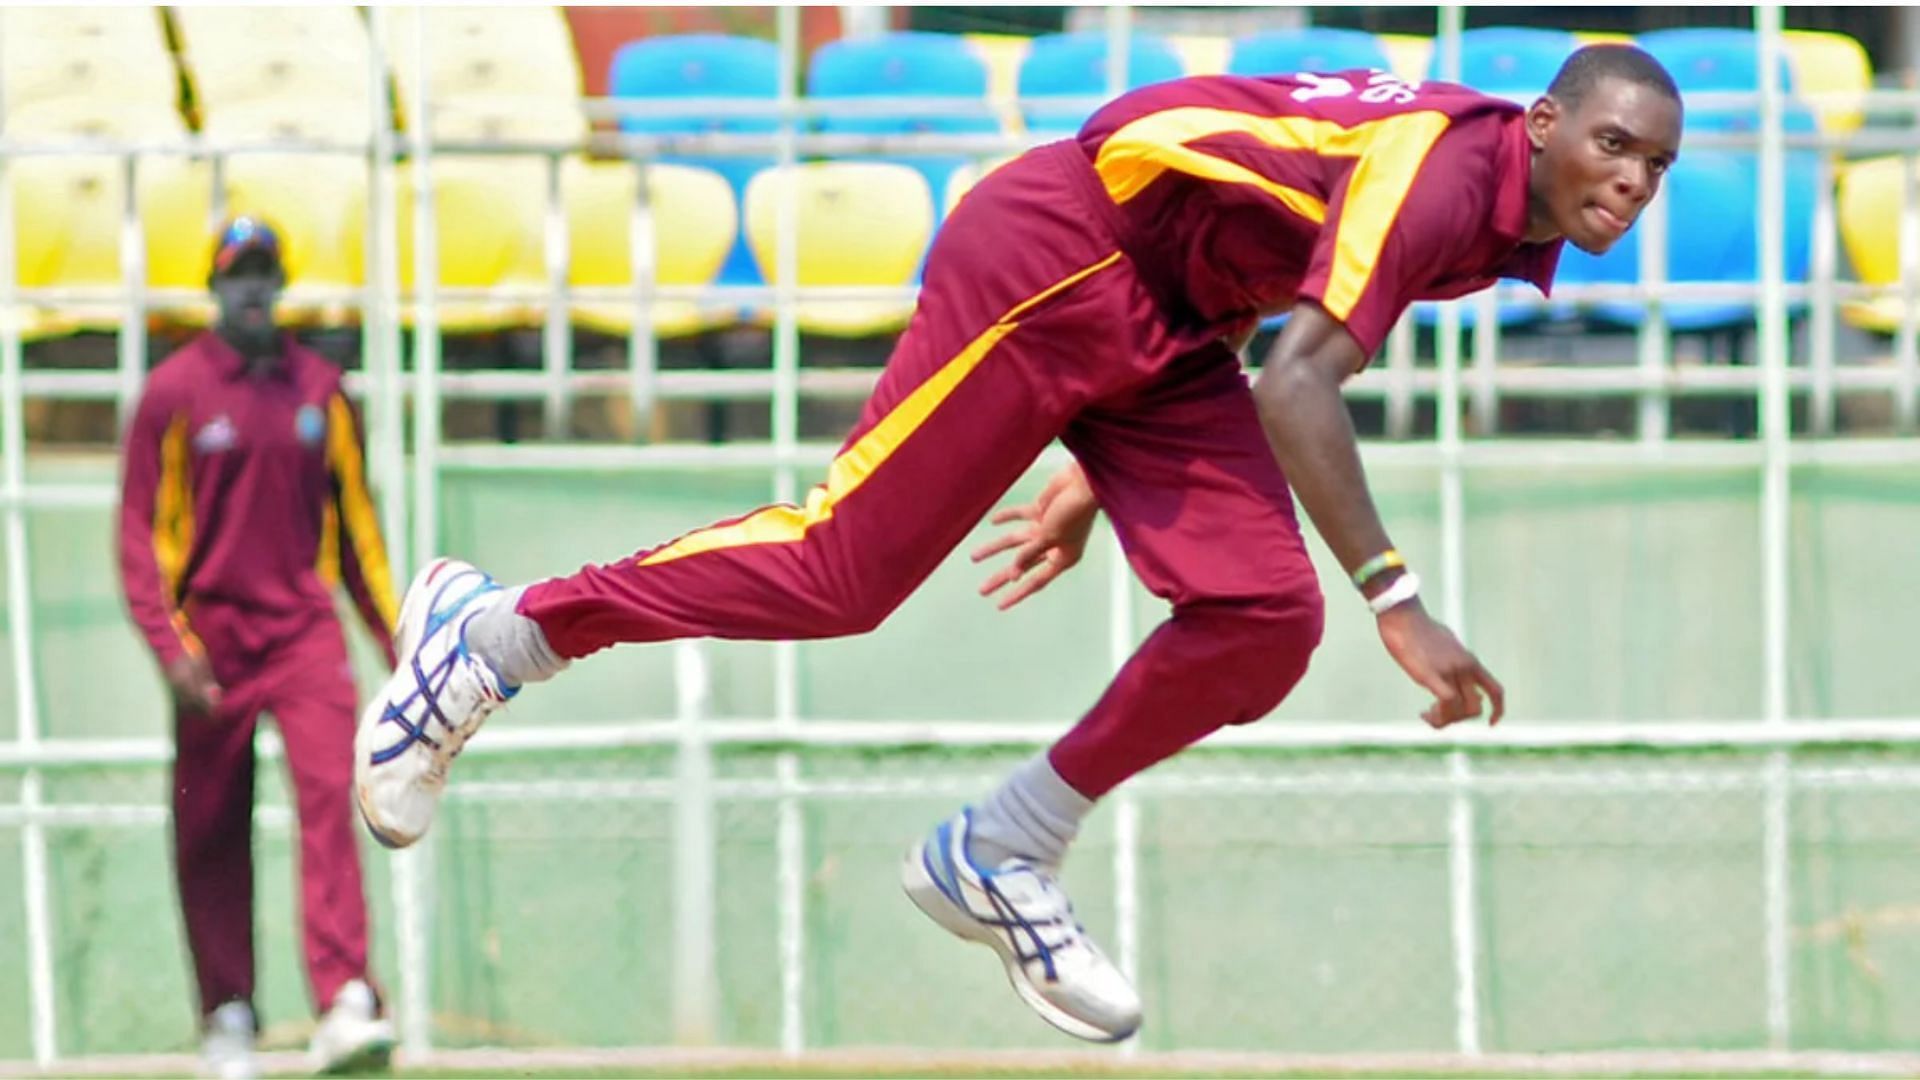 Justin Greaves in action for the West Indies U-19 team in 2011. (Image courtesy: espncricinfo.com)